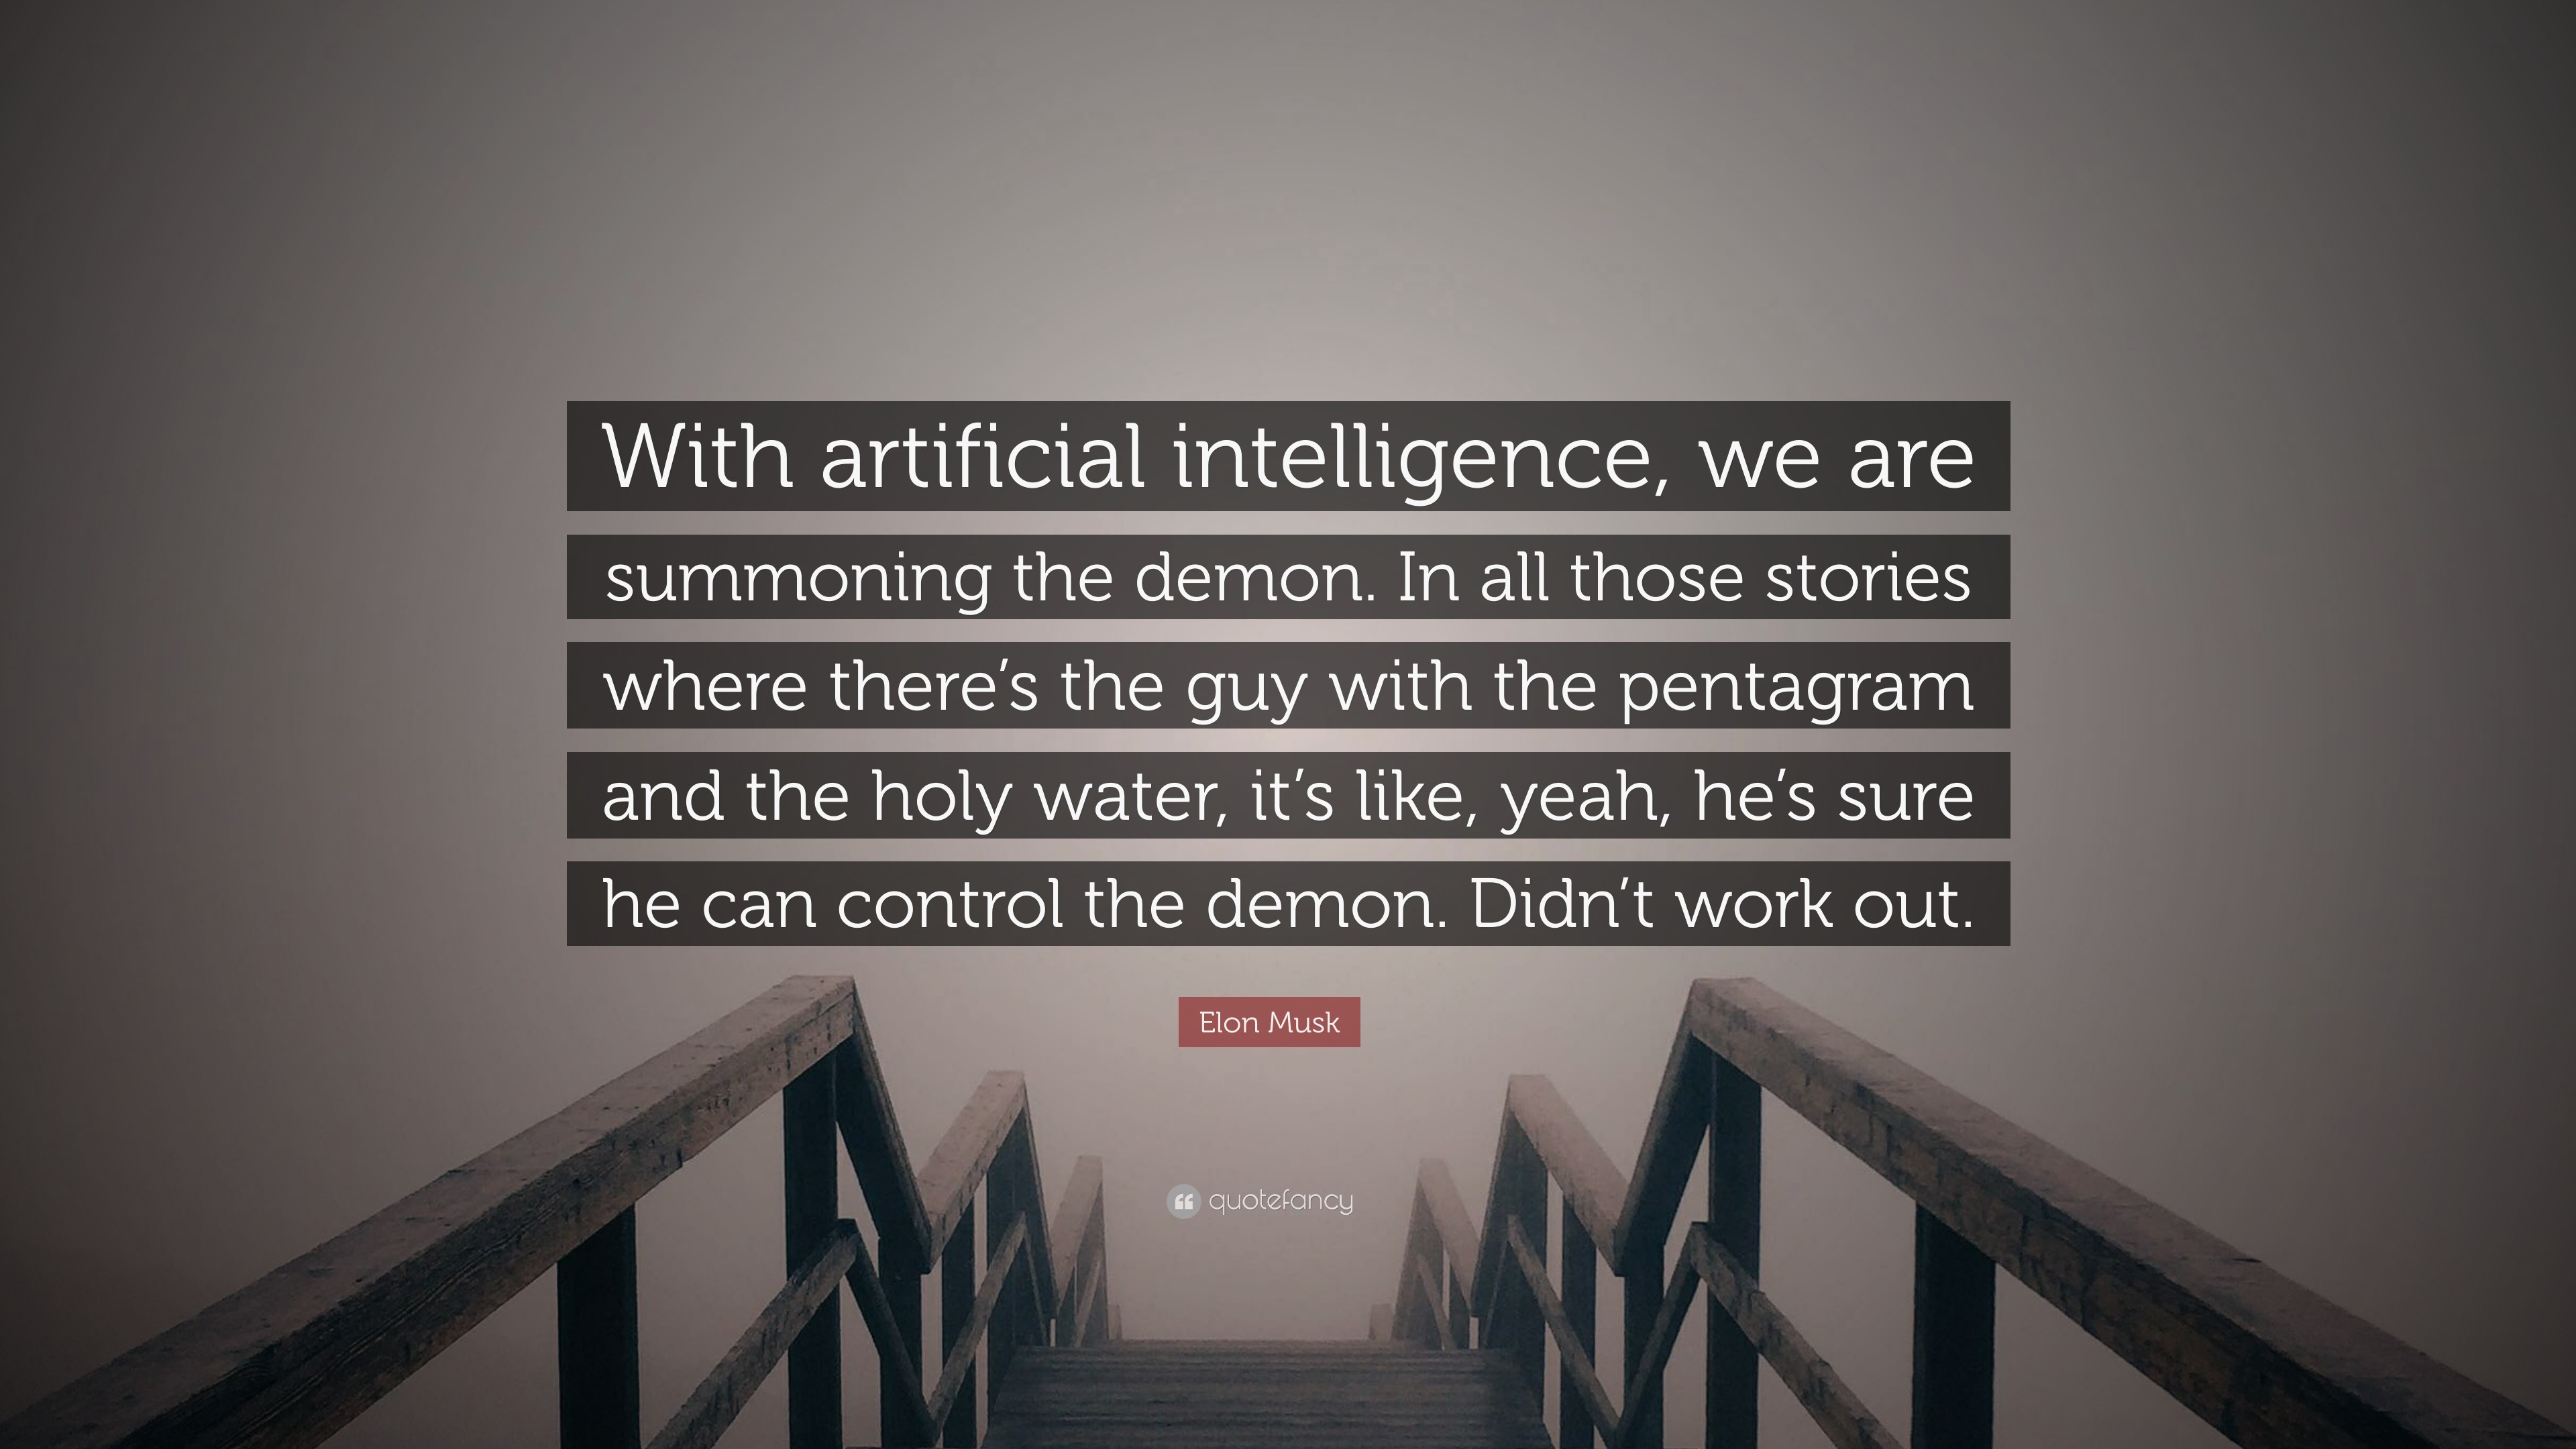 Elon Musk and how through AI, they are summoning the demon.